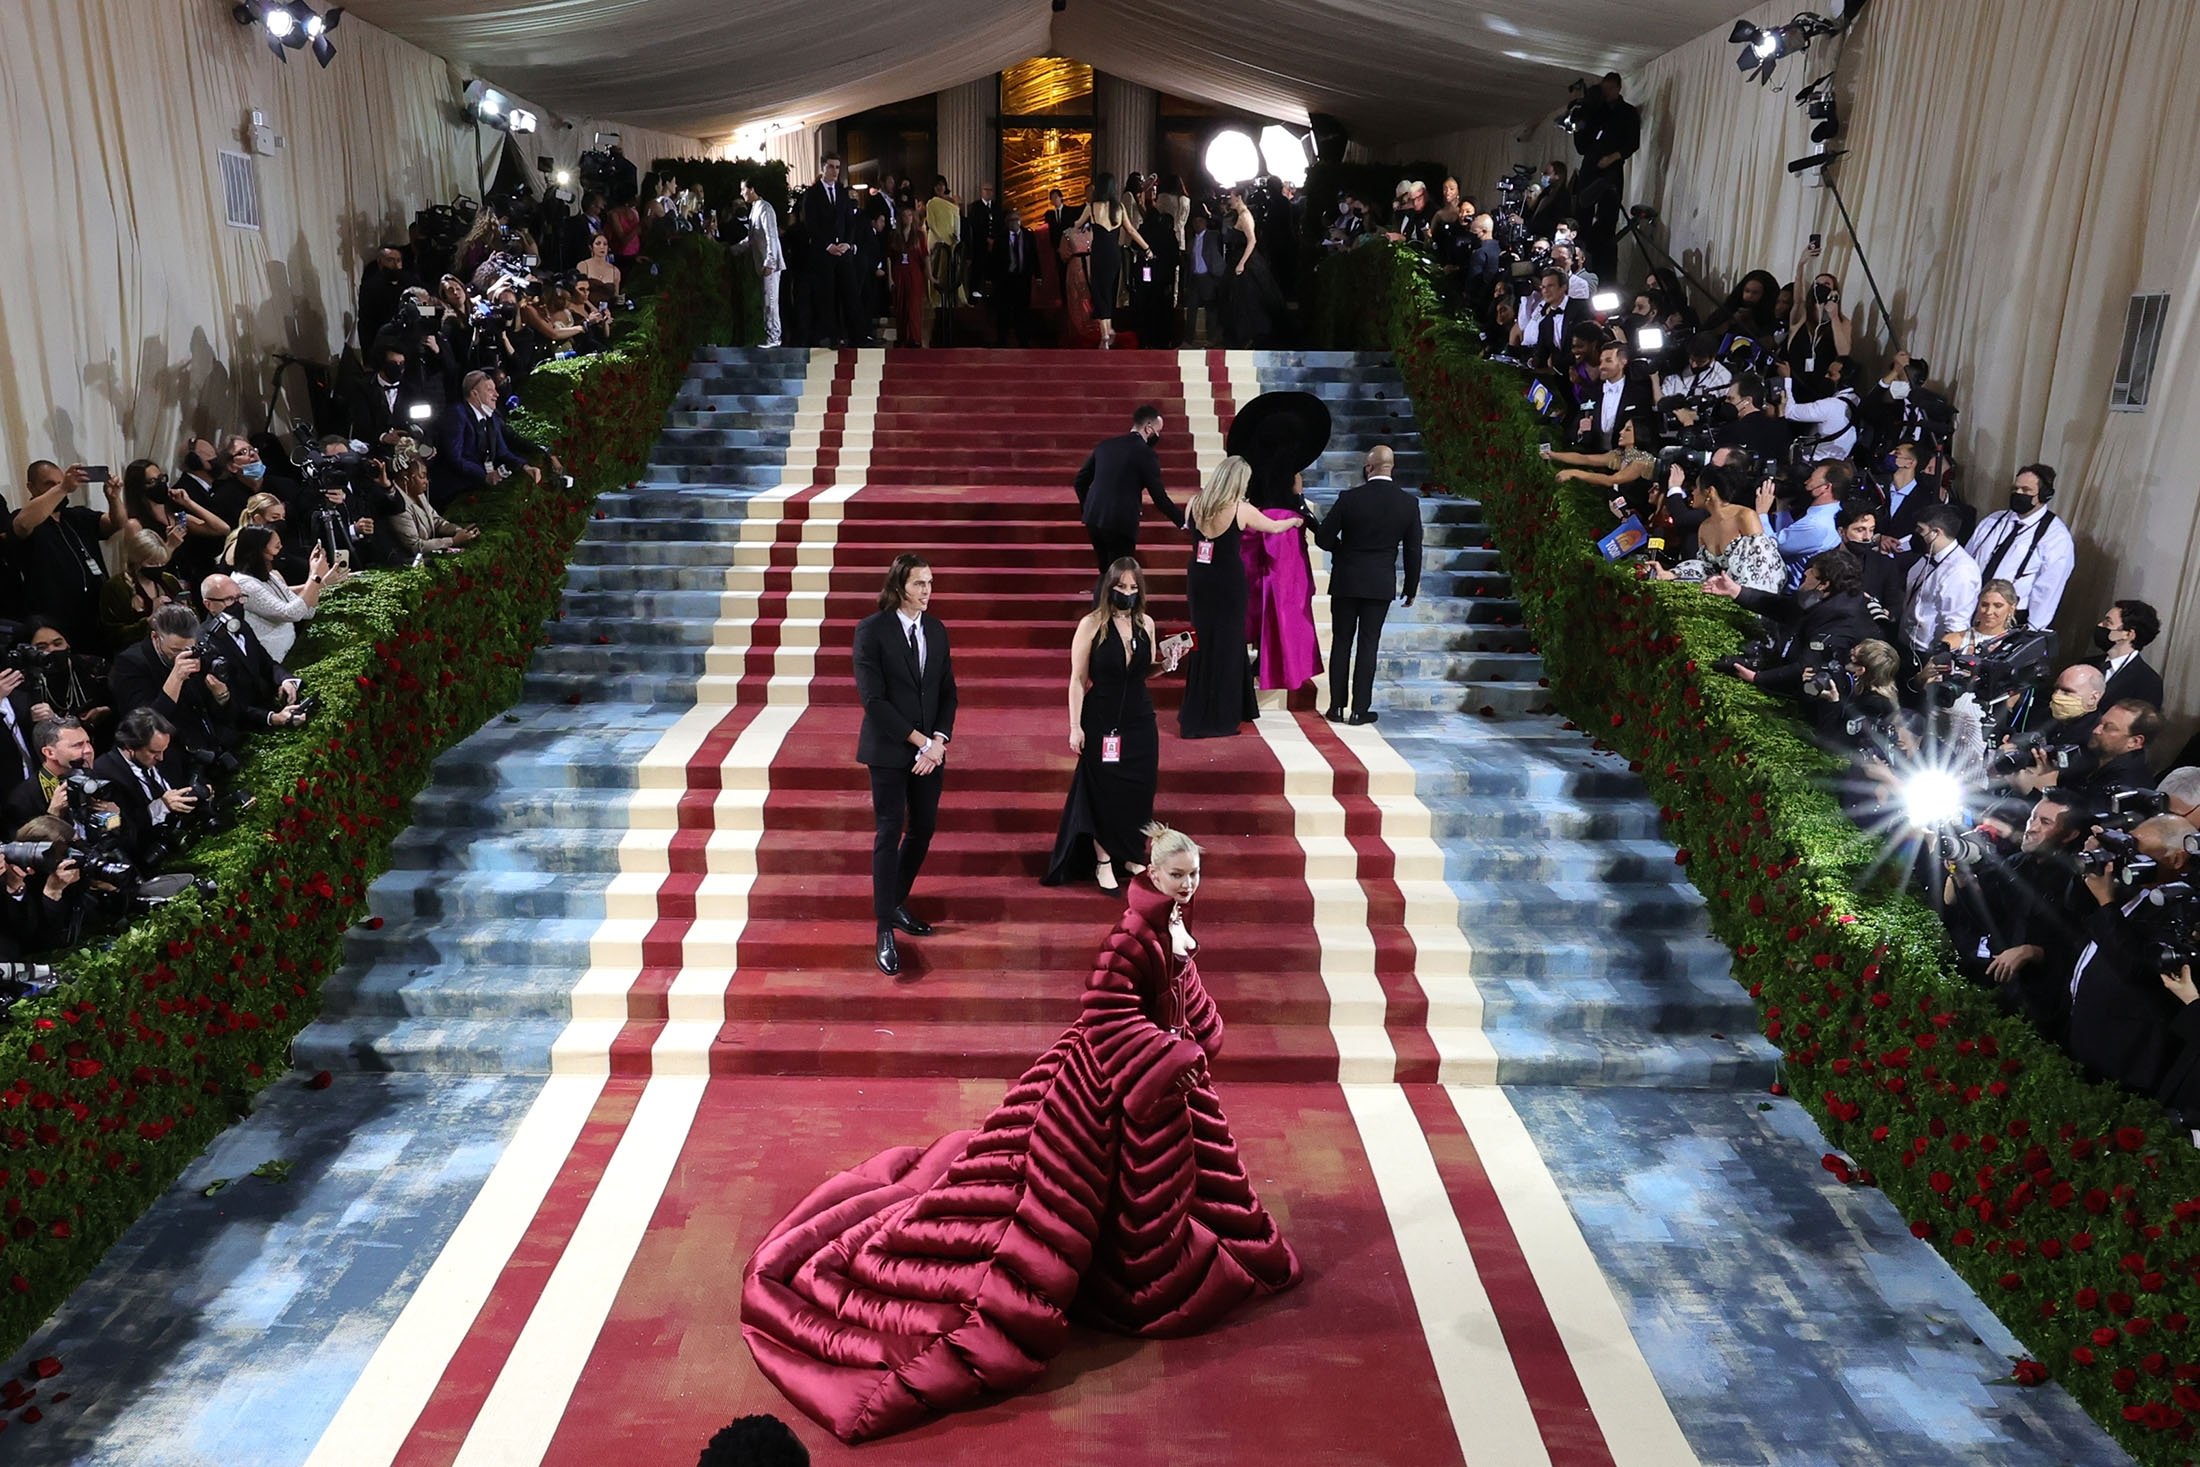 Fashion's biggest night Met Gala approaches fast, here's a guide